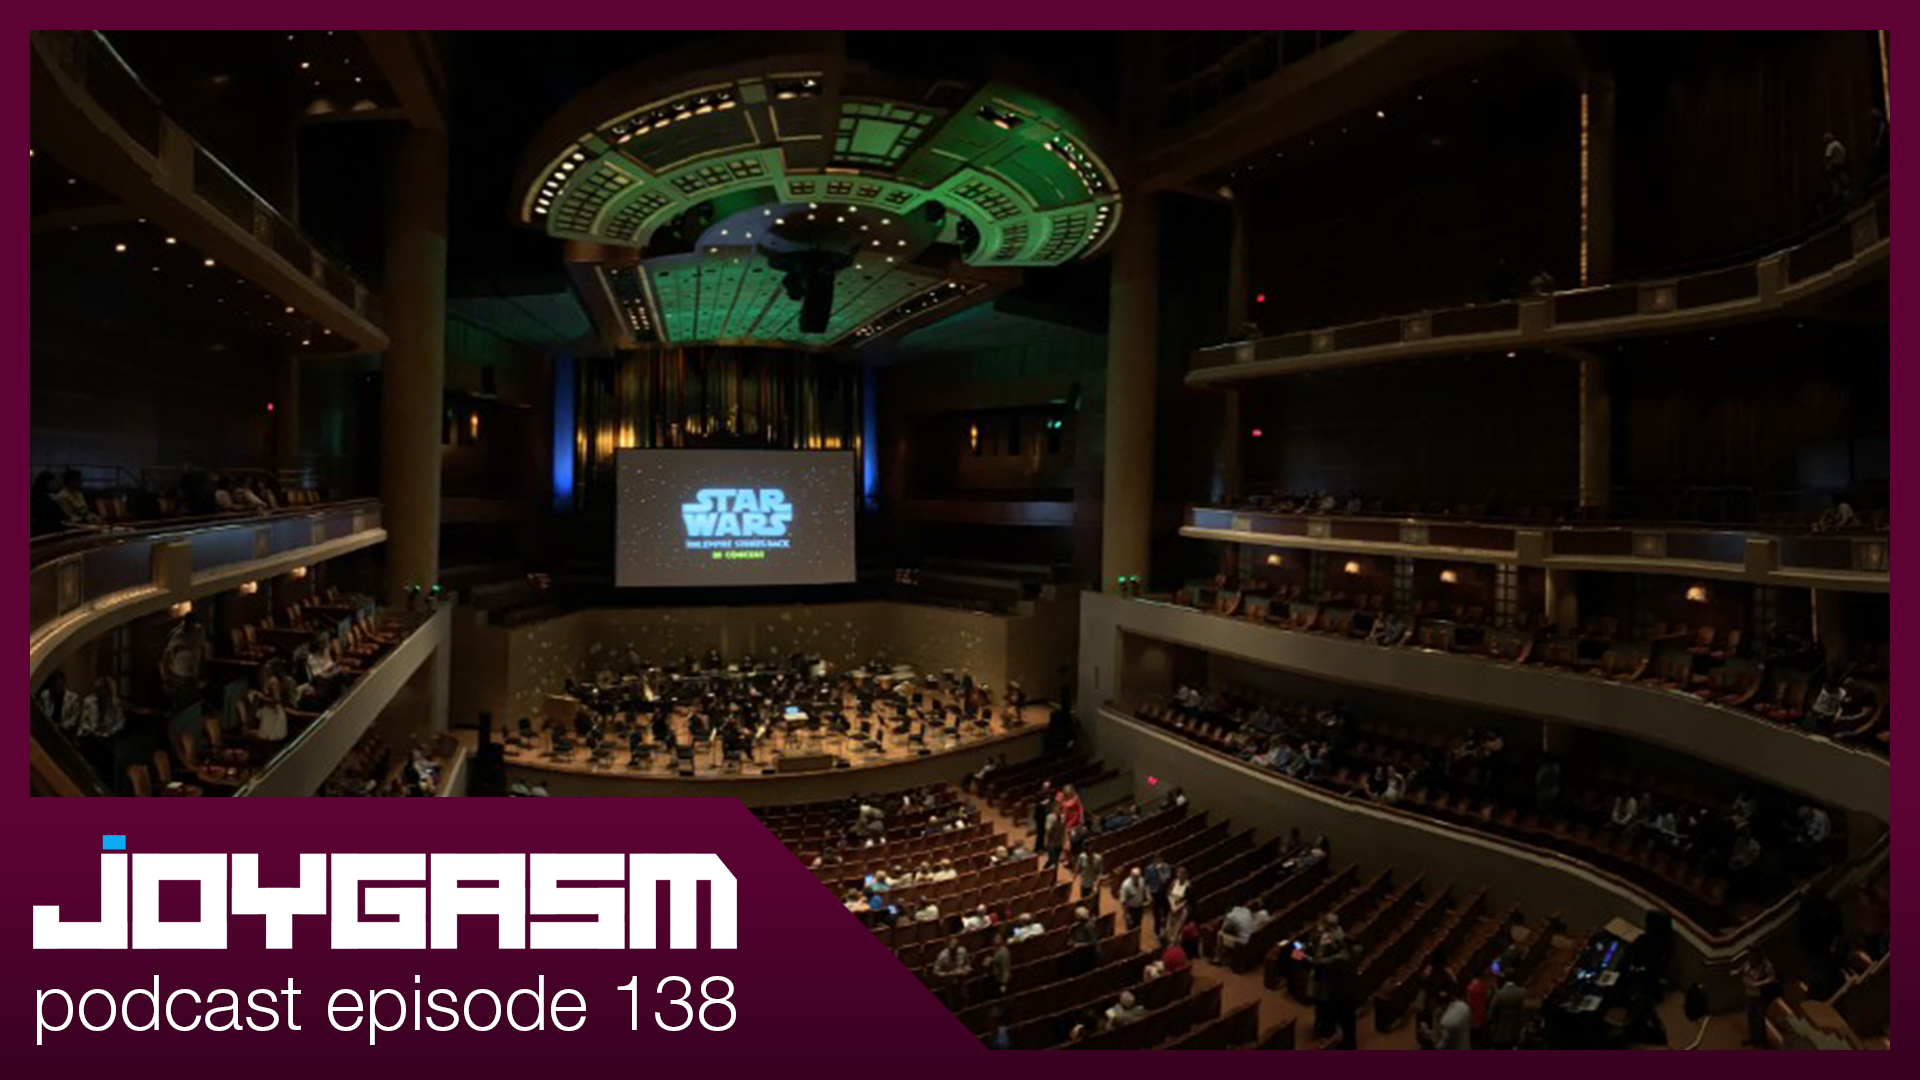 Ep. 138: The Empire Strikes Back Performed By The Dallas Symphony & More